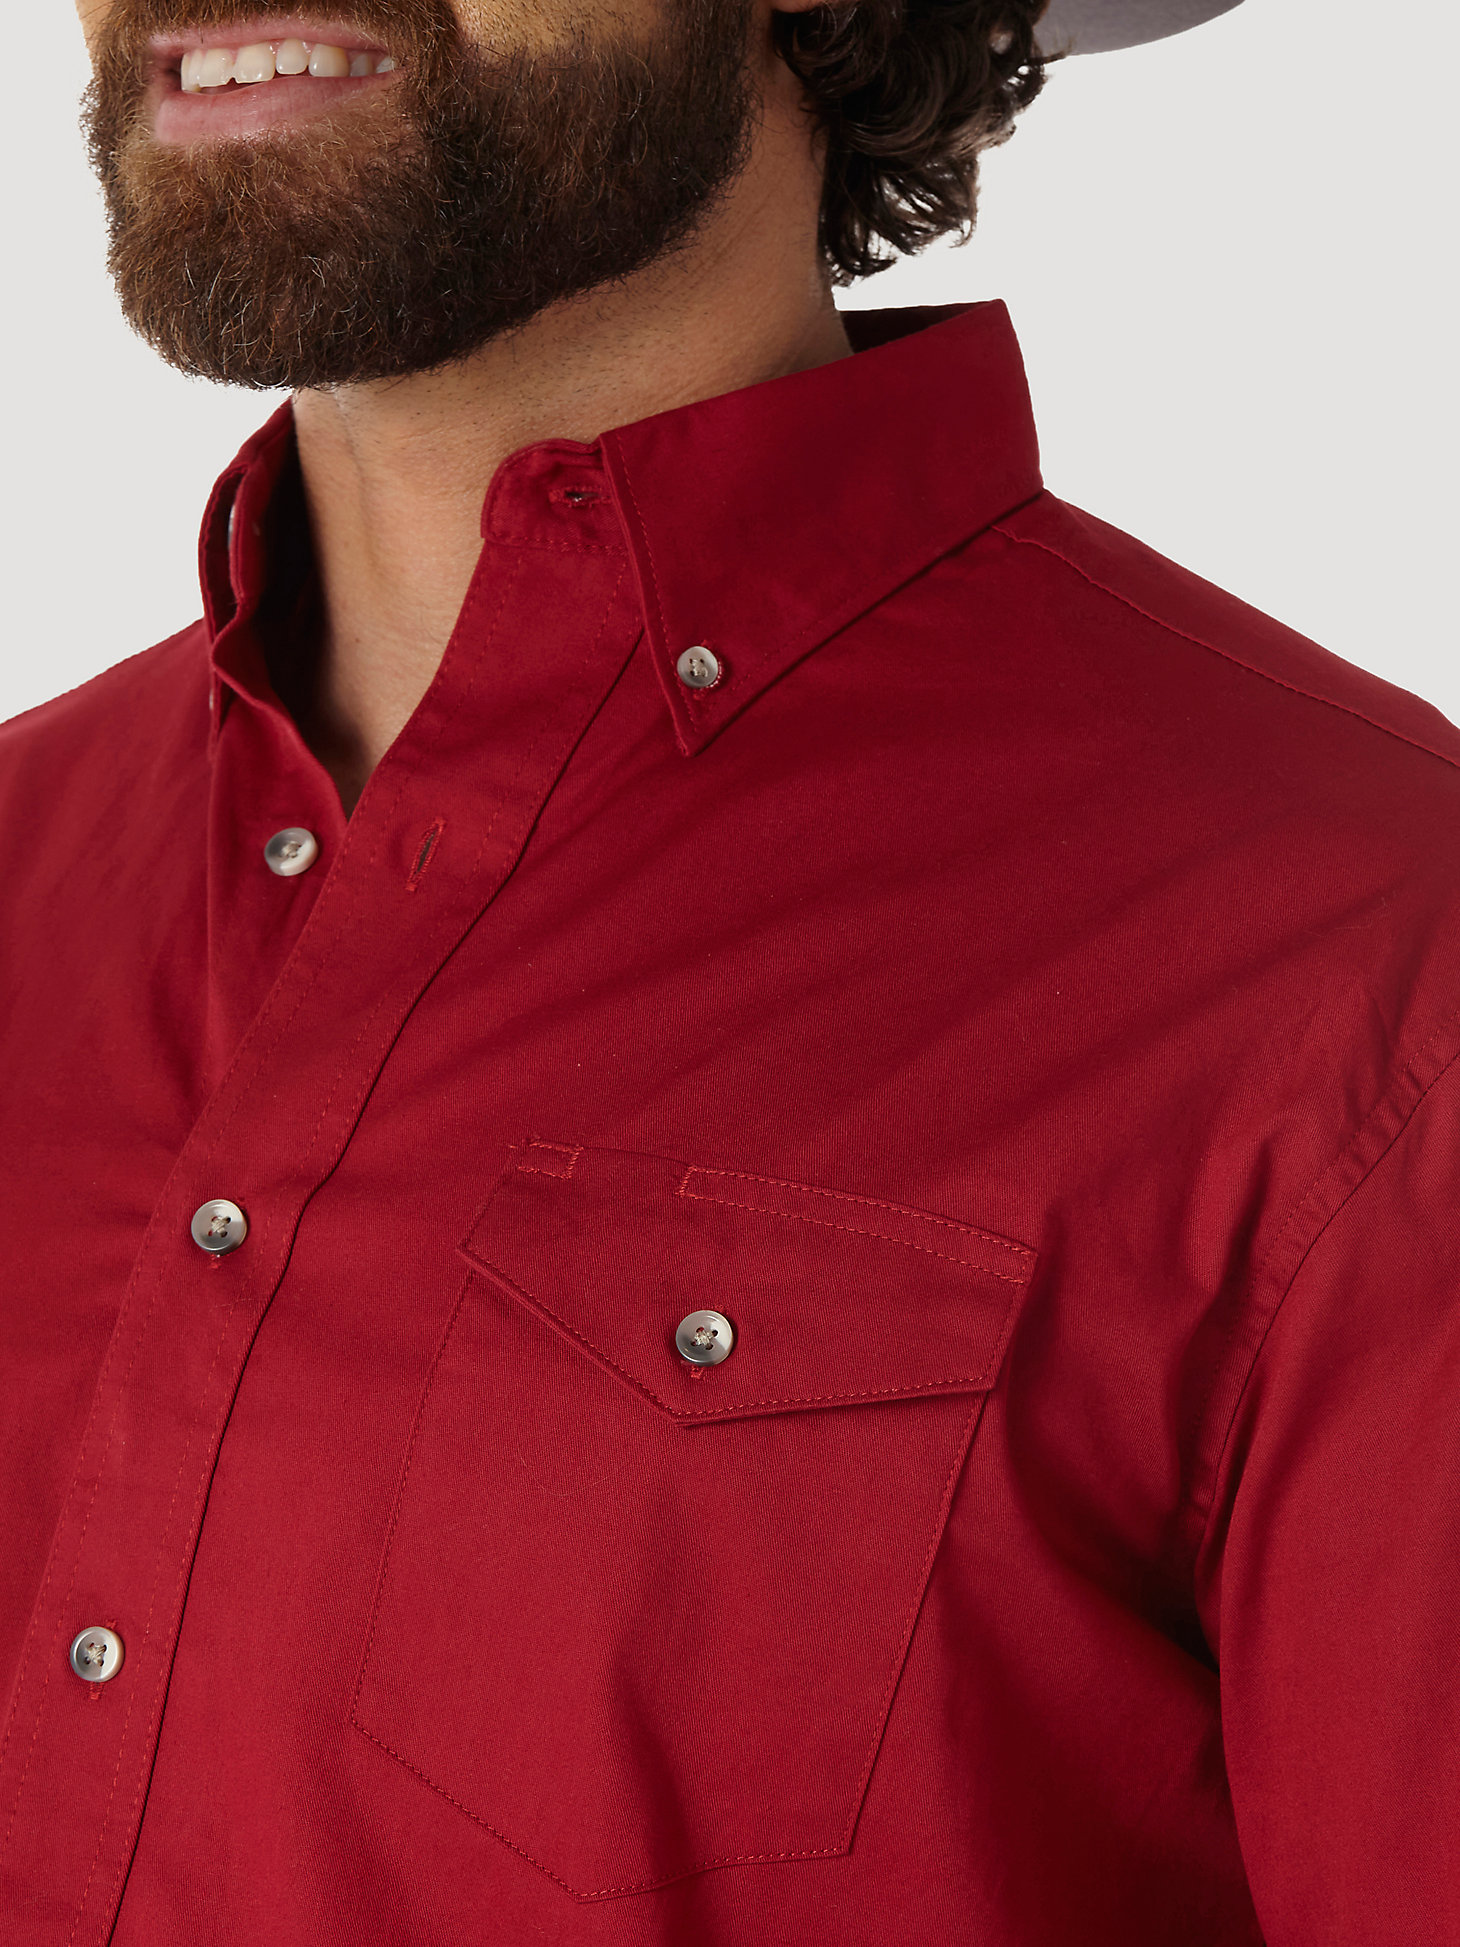 Painted Desert® Long Sleeve Button Down Lightweight Solid Twill Shirt in Red alternative view 2